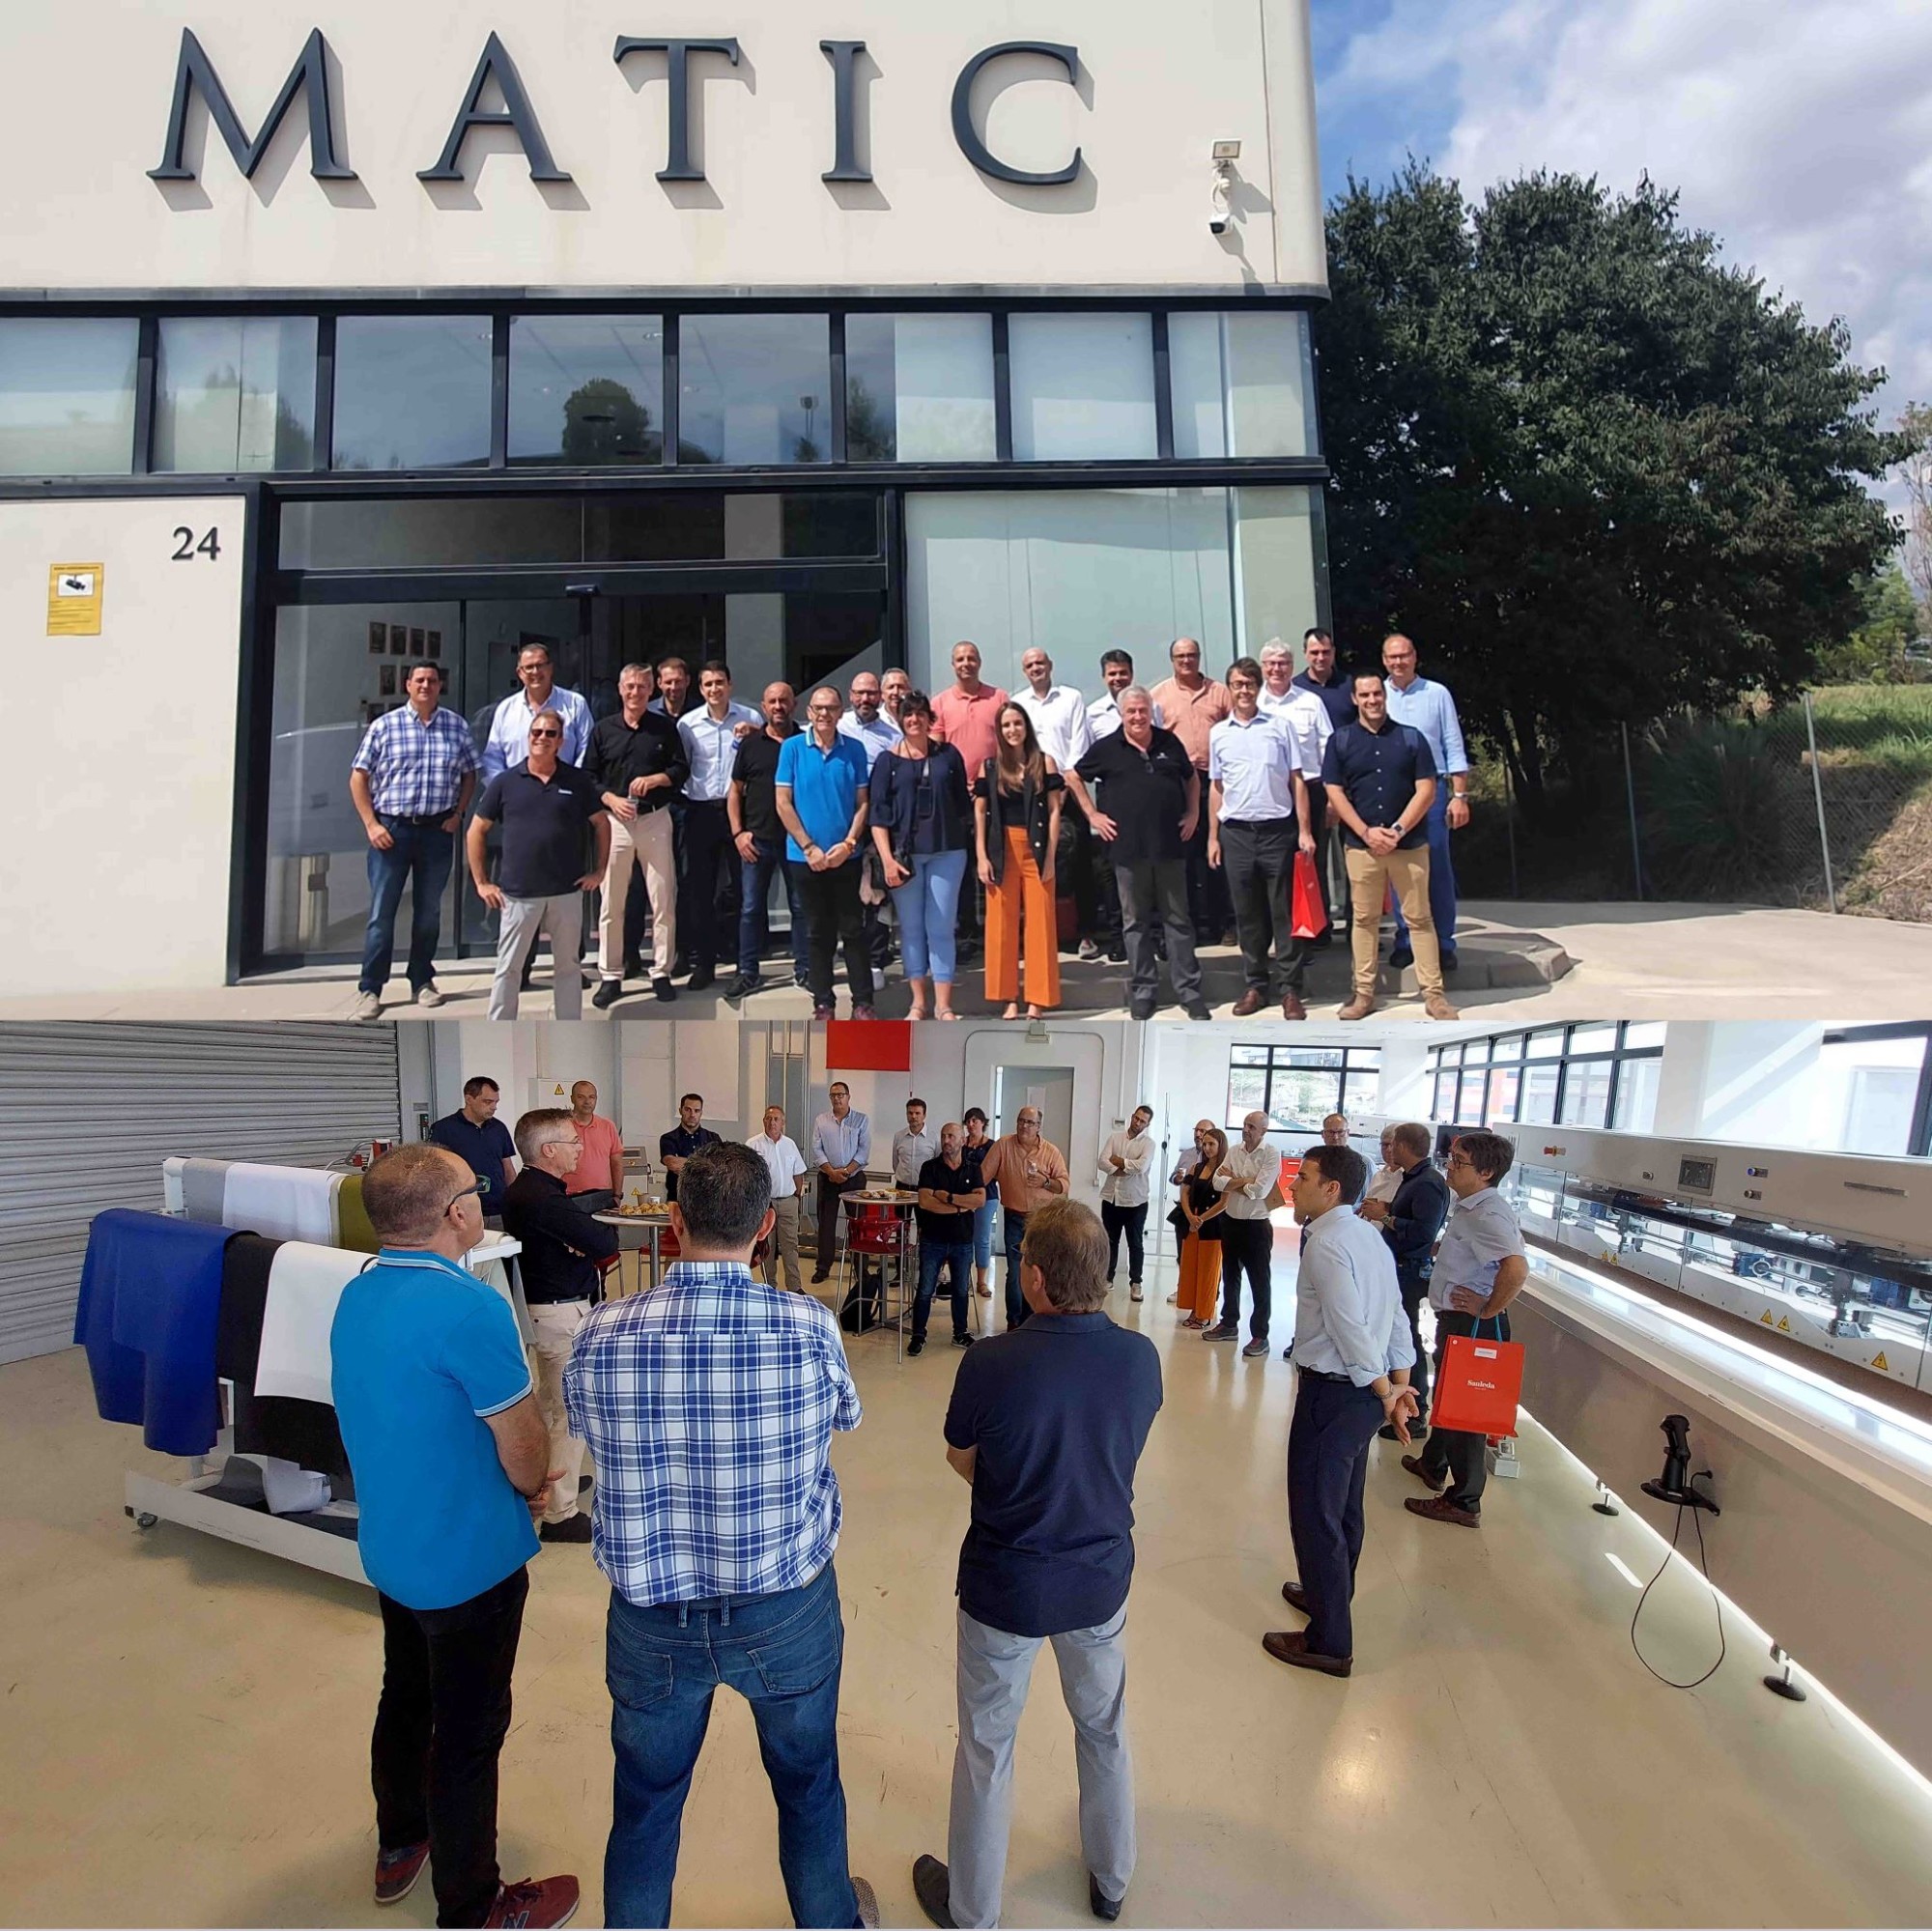 The visit to Matic from Sauleda, one of the most important manufacturers of technical fabrics in Spain.